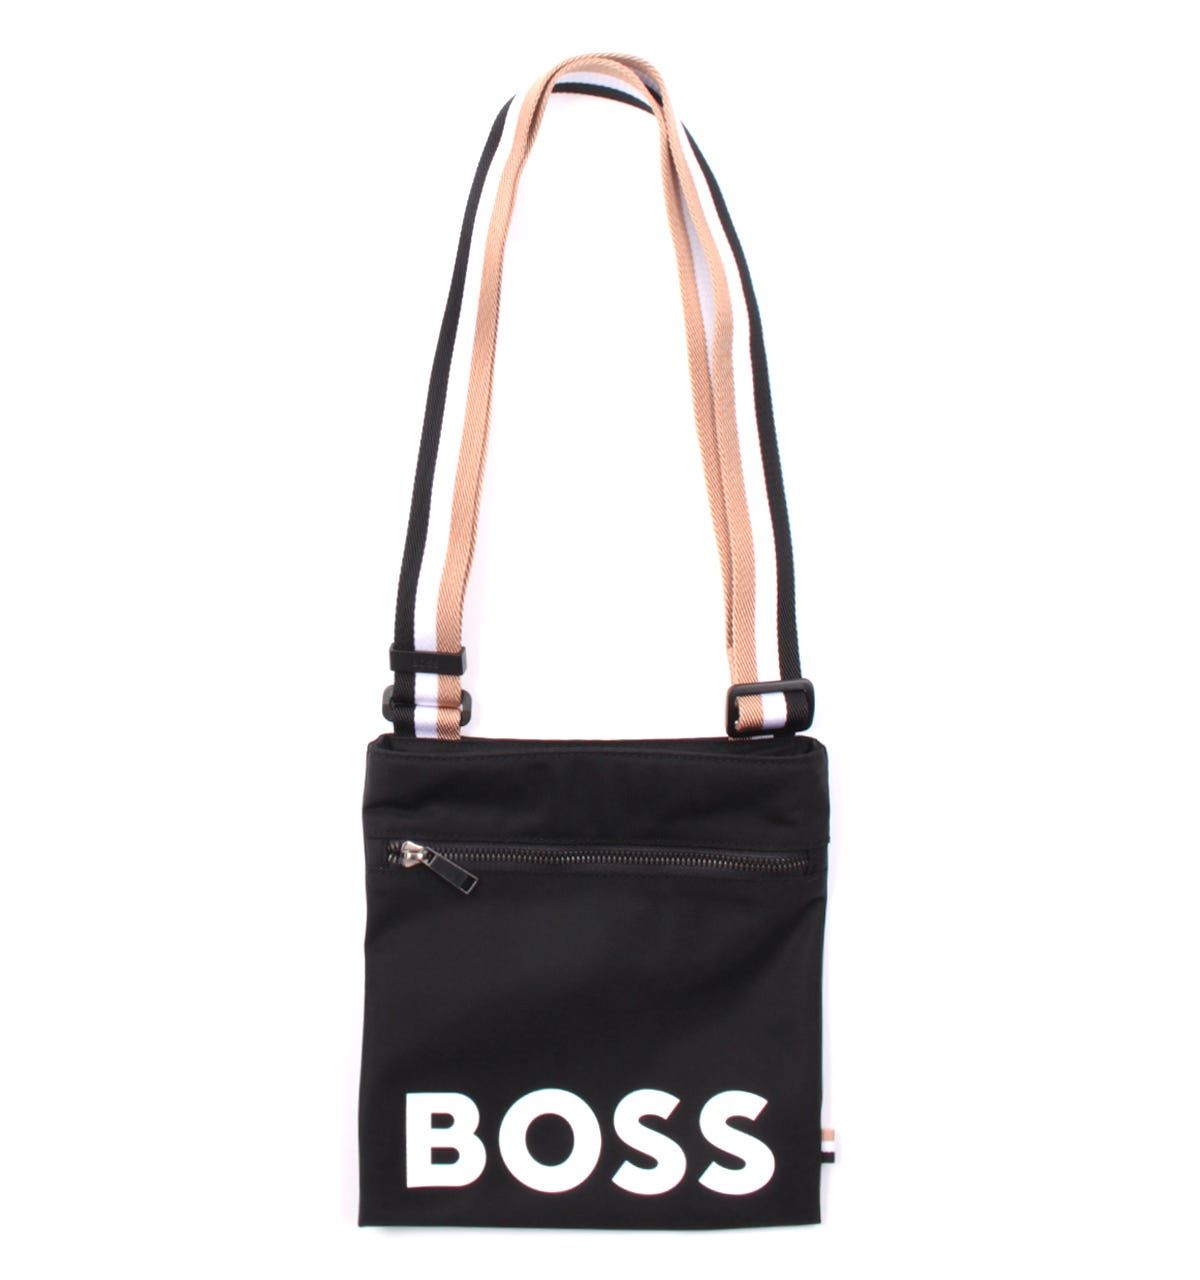 An all round pouch with an adjustable webbing strap for any way wear. Featuring a main zip compartment with a front zip compartment. Finished with a large BOSS logo print. Dimensions: L: 20cm x H: 22cm, Front Zip Compartment, Main Zip Compartment, Adjustable BOSS Colour Strap, Printed Logo, Pure Recycled Nylon.